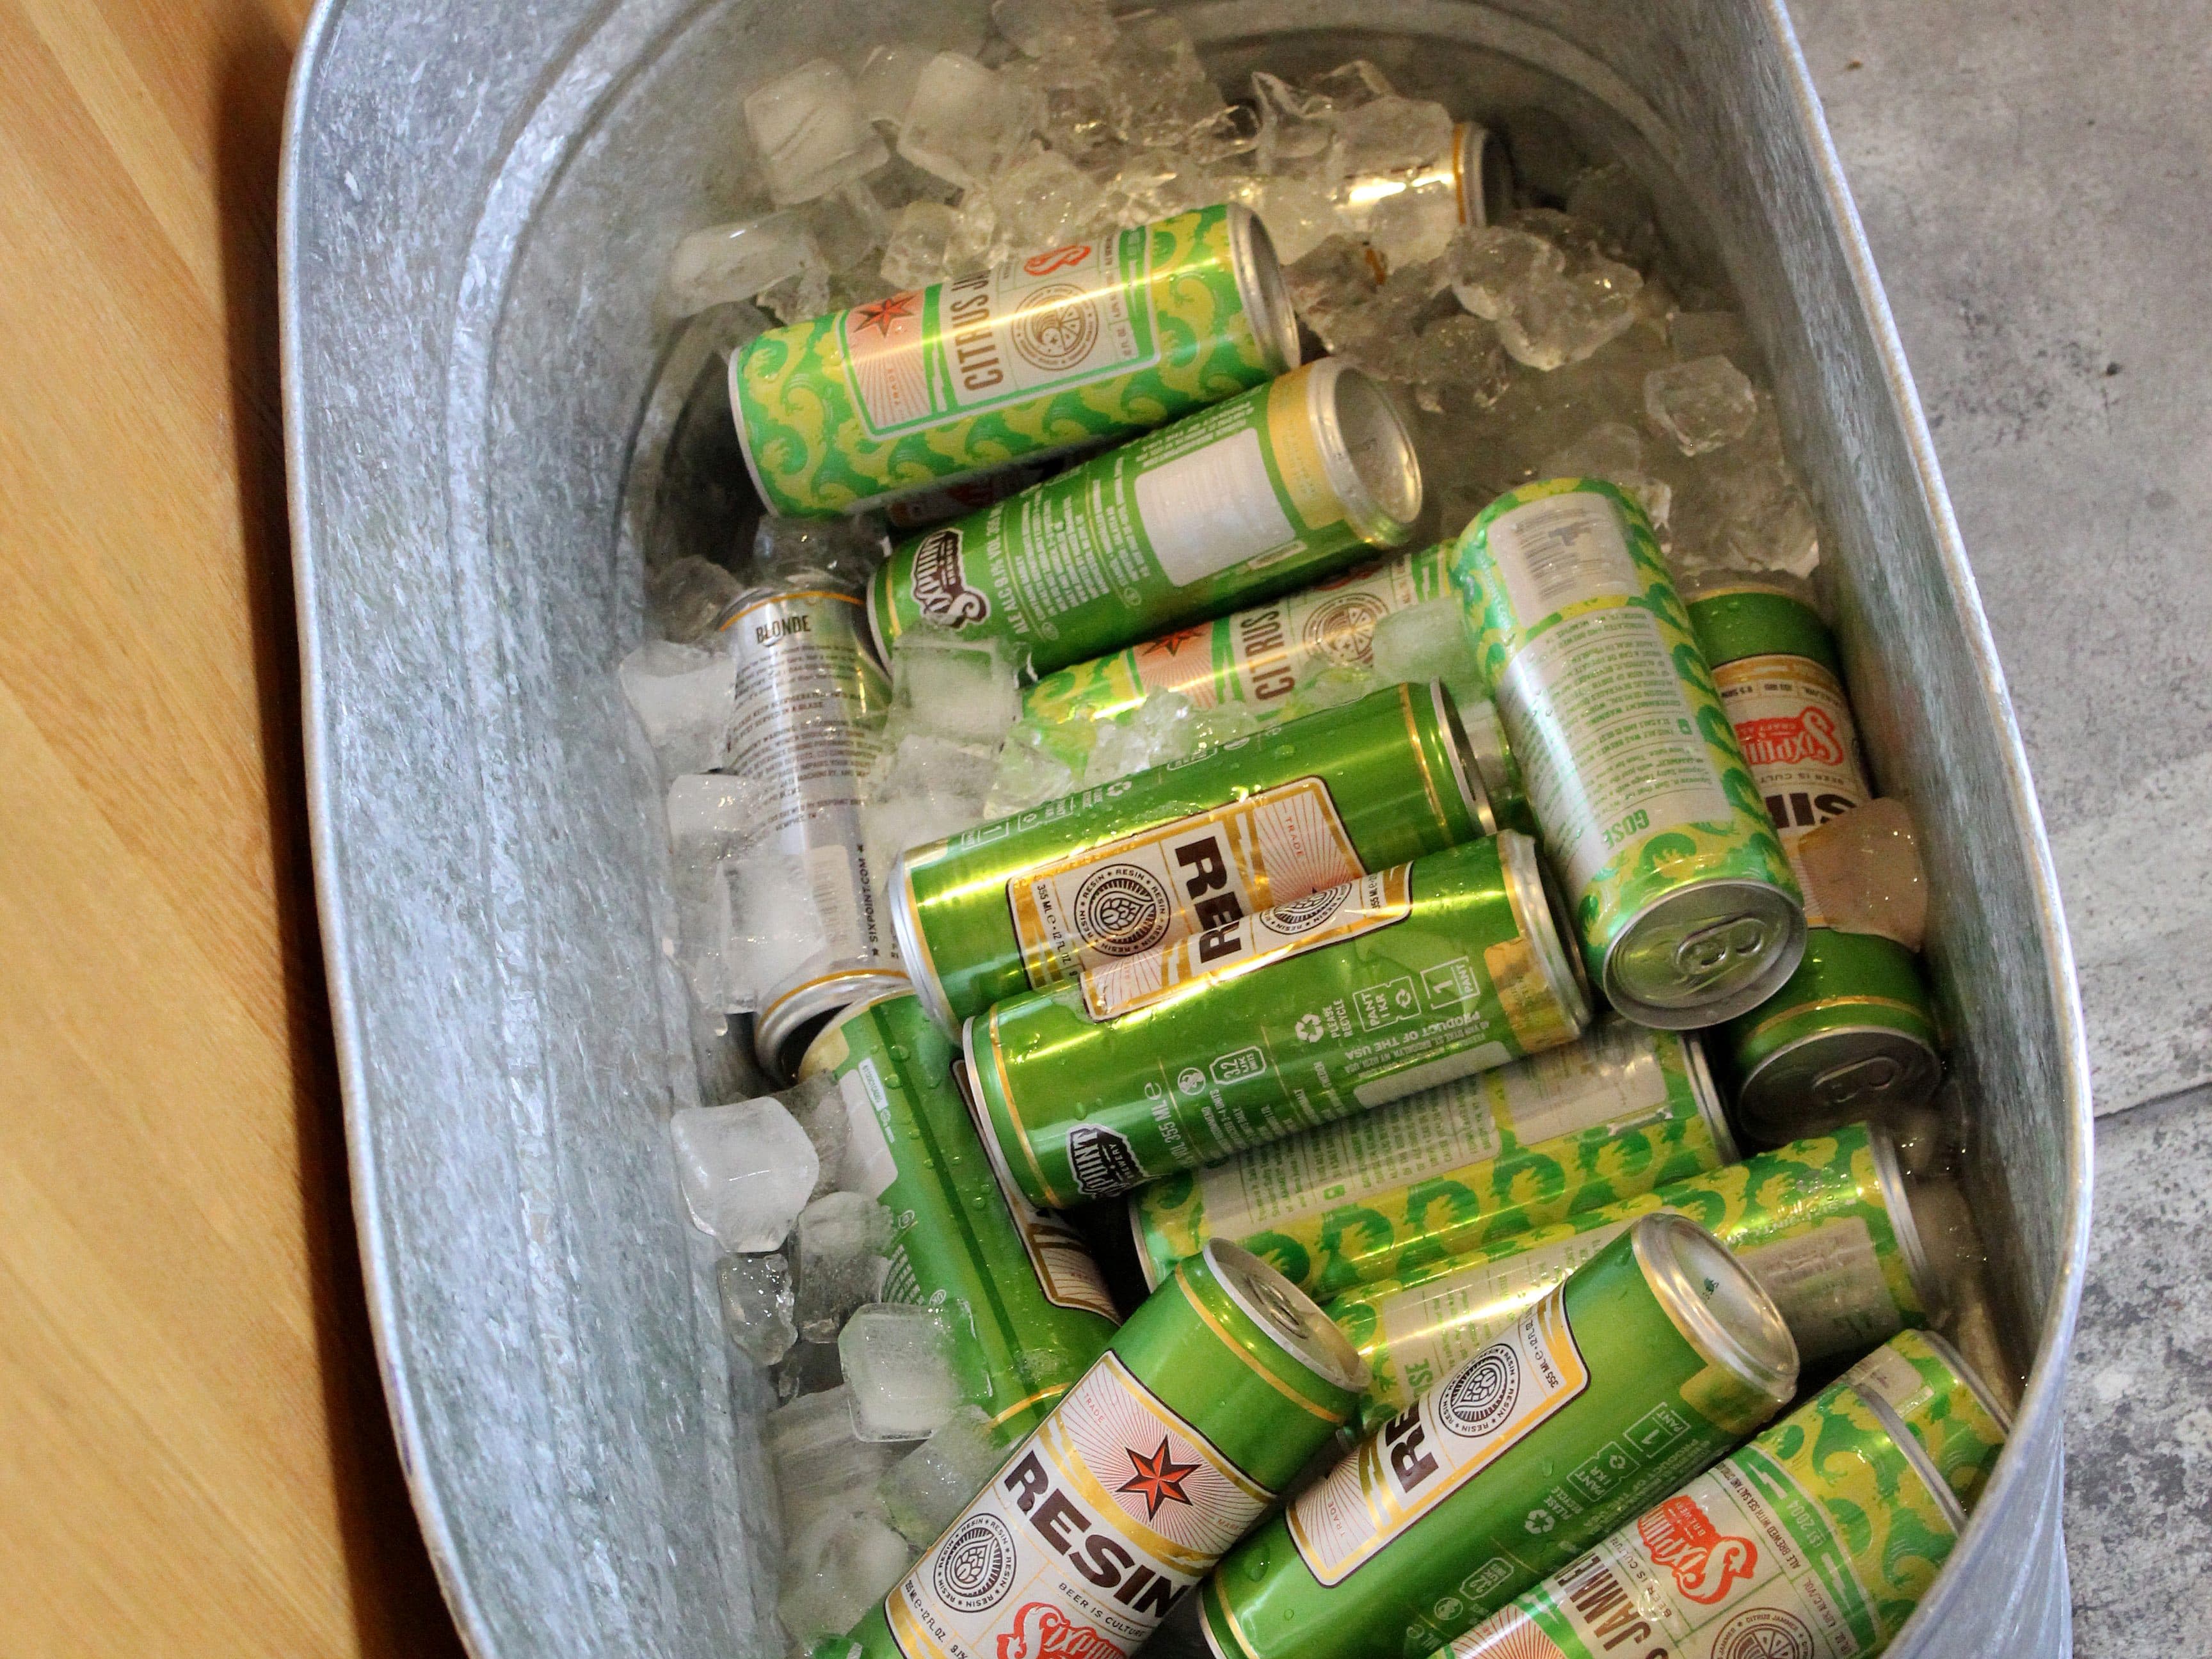 A metal tub filled with ice and various beer cans, primarily featuring green and yellow labels. Several cans are visible, resting in the tub, keeping cool. The setup is on a stone or concrete floor near a wooden surface.